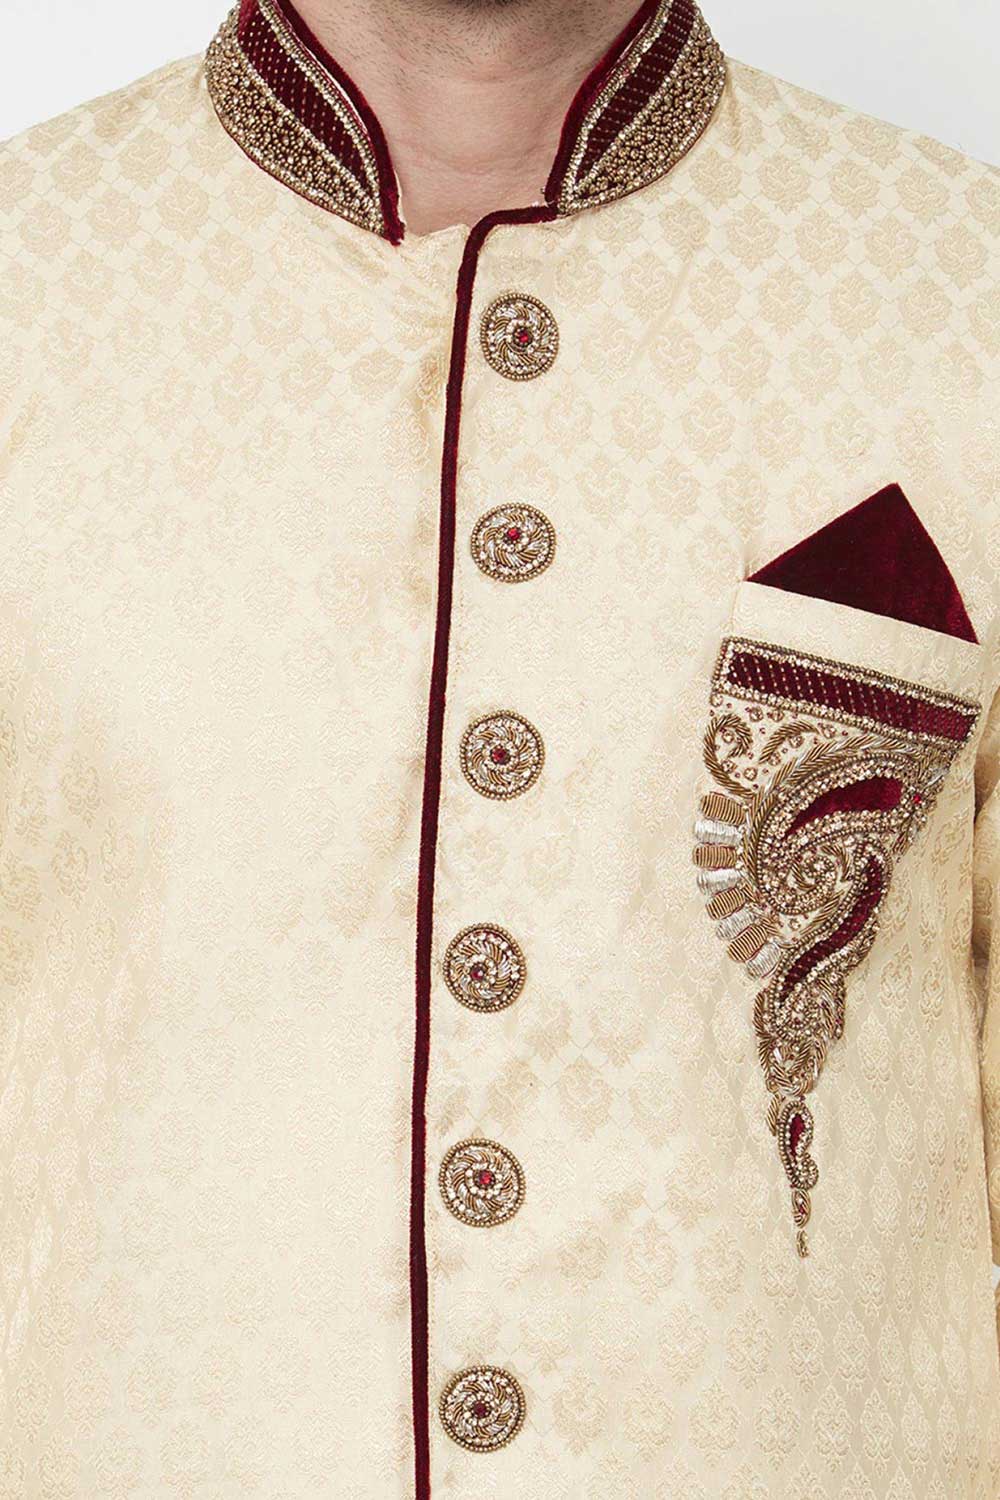 Cream Sherwani Set Indian Clothing in Denver, CO, Aurora, CO, Boulder, CO, Fort Collins, CO, Colorado Springs, CO, Parker, CO, Highlands Ranch, CO, Cherry Creek, CO, Centennial, CO, and Longmont, CO. NATIONWIDE SHIPPING USA- India Fashion X